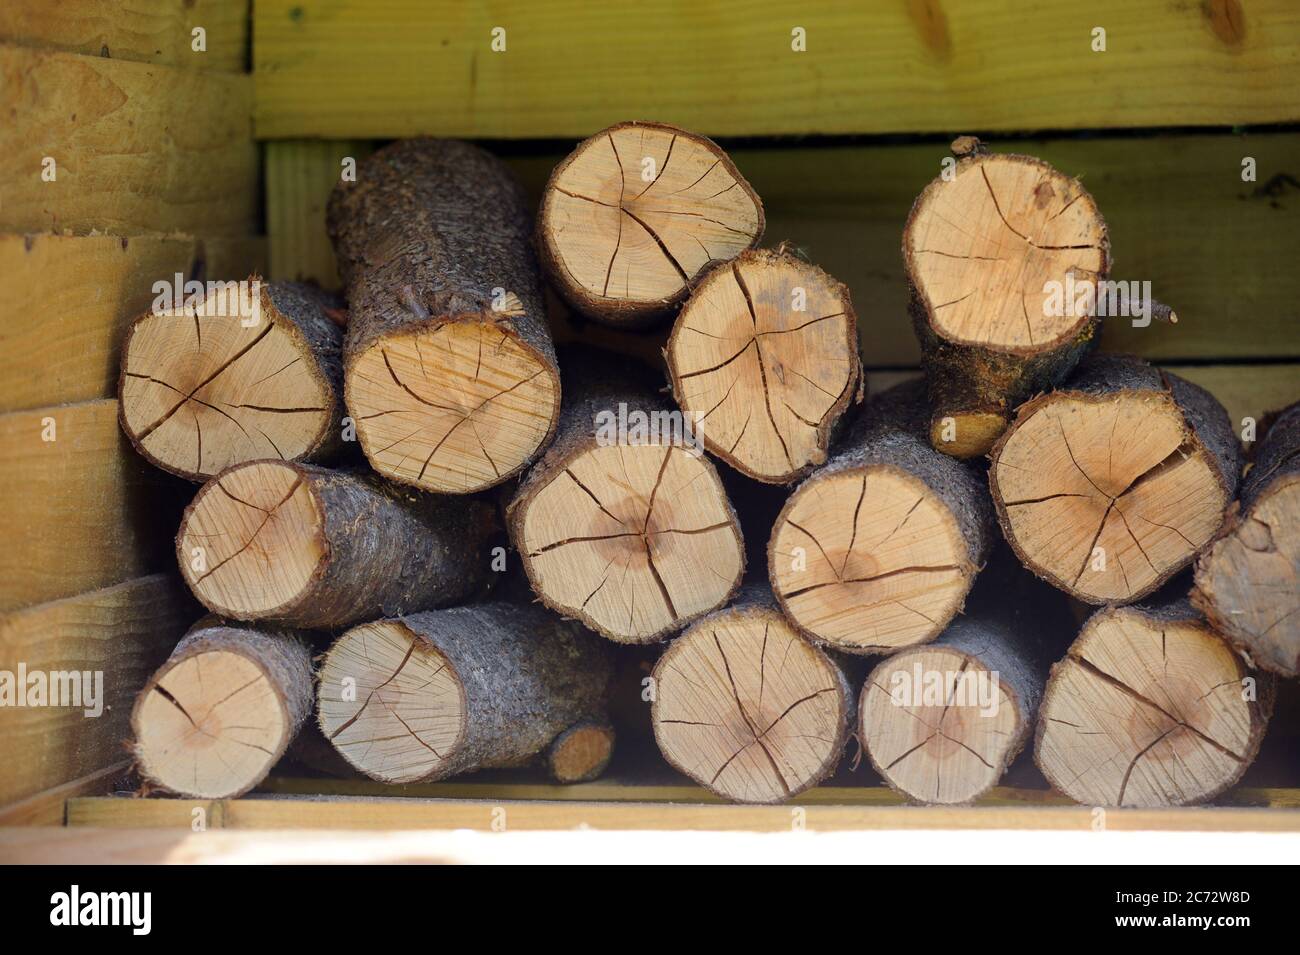 LOGS IN STORAGE SHED RE FIRES HEATING SMOKELESS THE ENVIRONMENT WOOD FUEL ETC UK Stock Photo